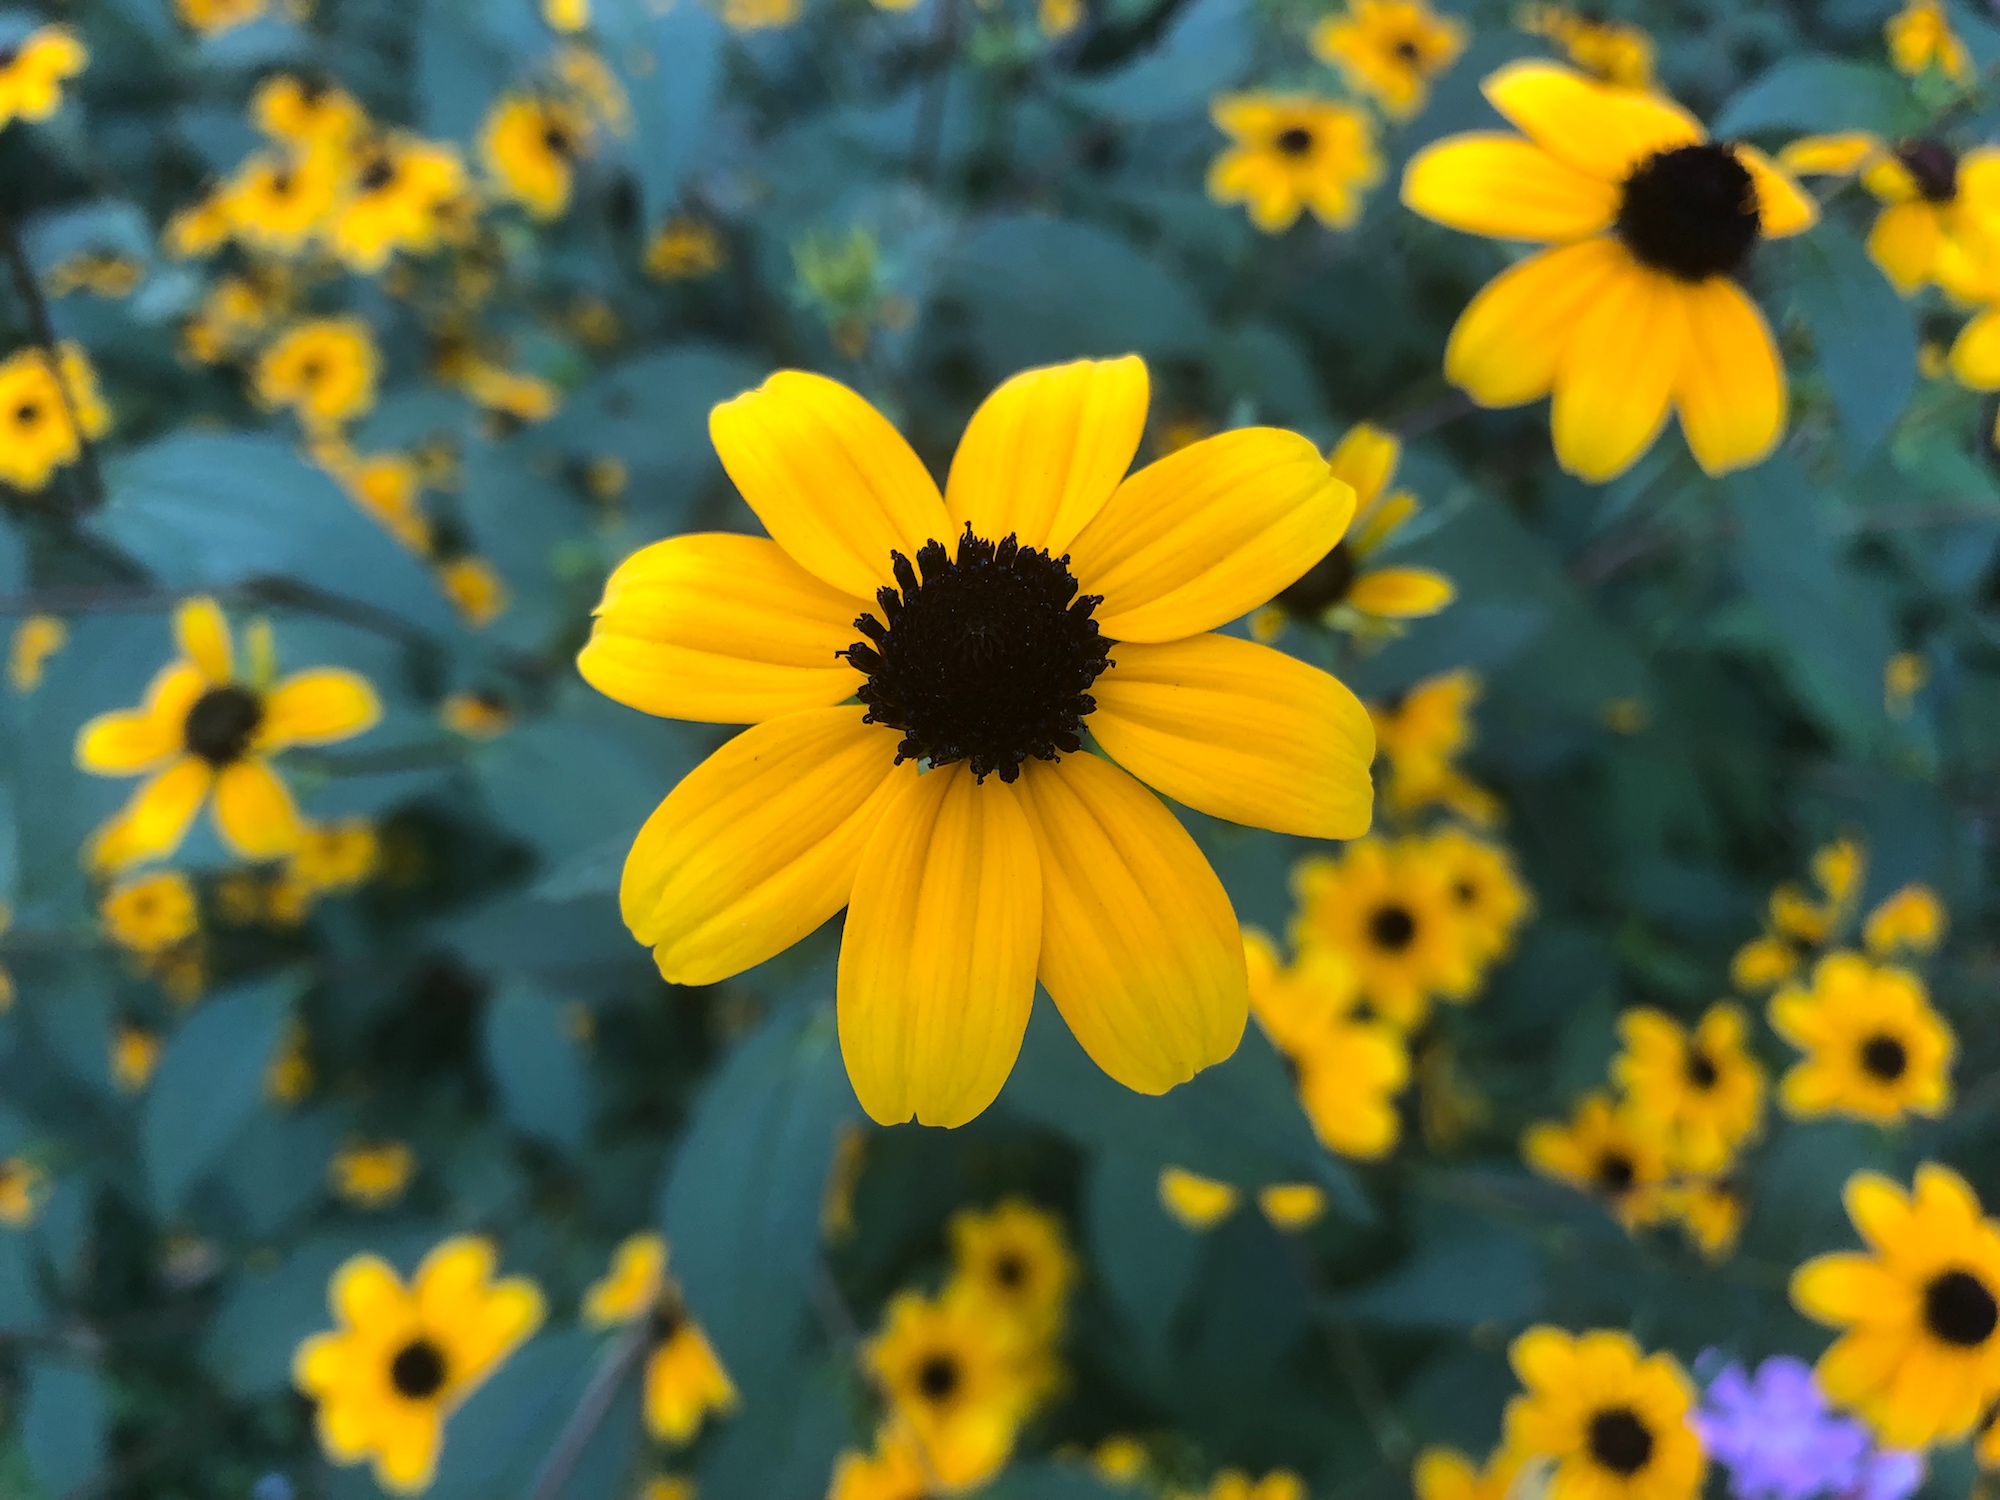 Brown-eyed Susan on banks of retaining pond in Madison, Wisconsin on August 21, 2019.